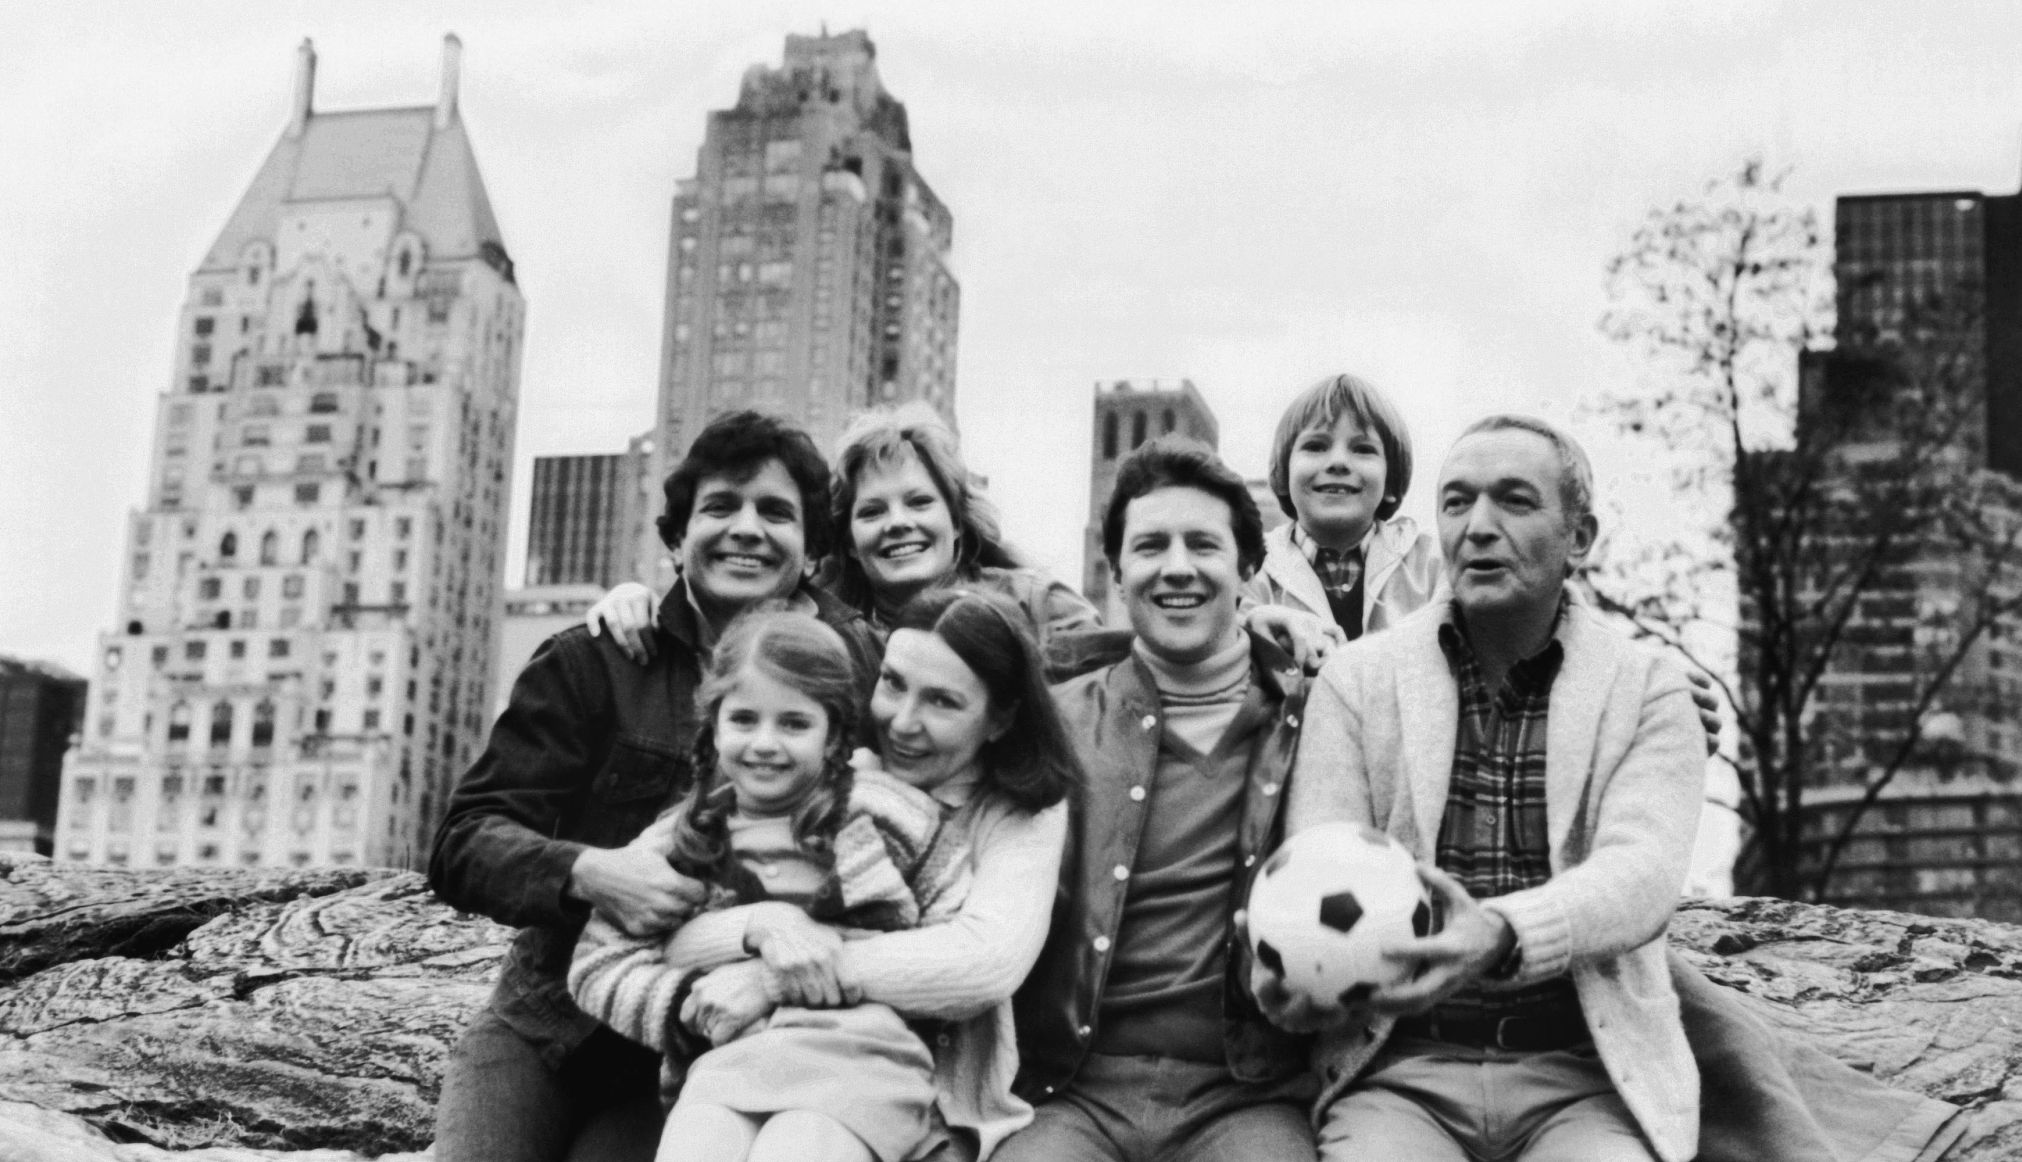 A group of adults and two children smile in a black and white image with a cityscape in the background.